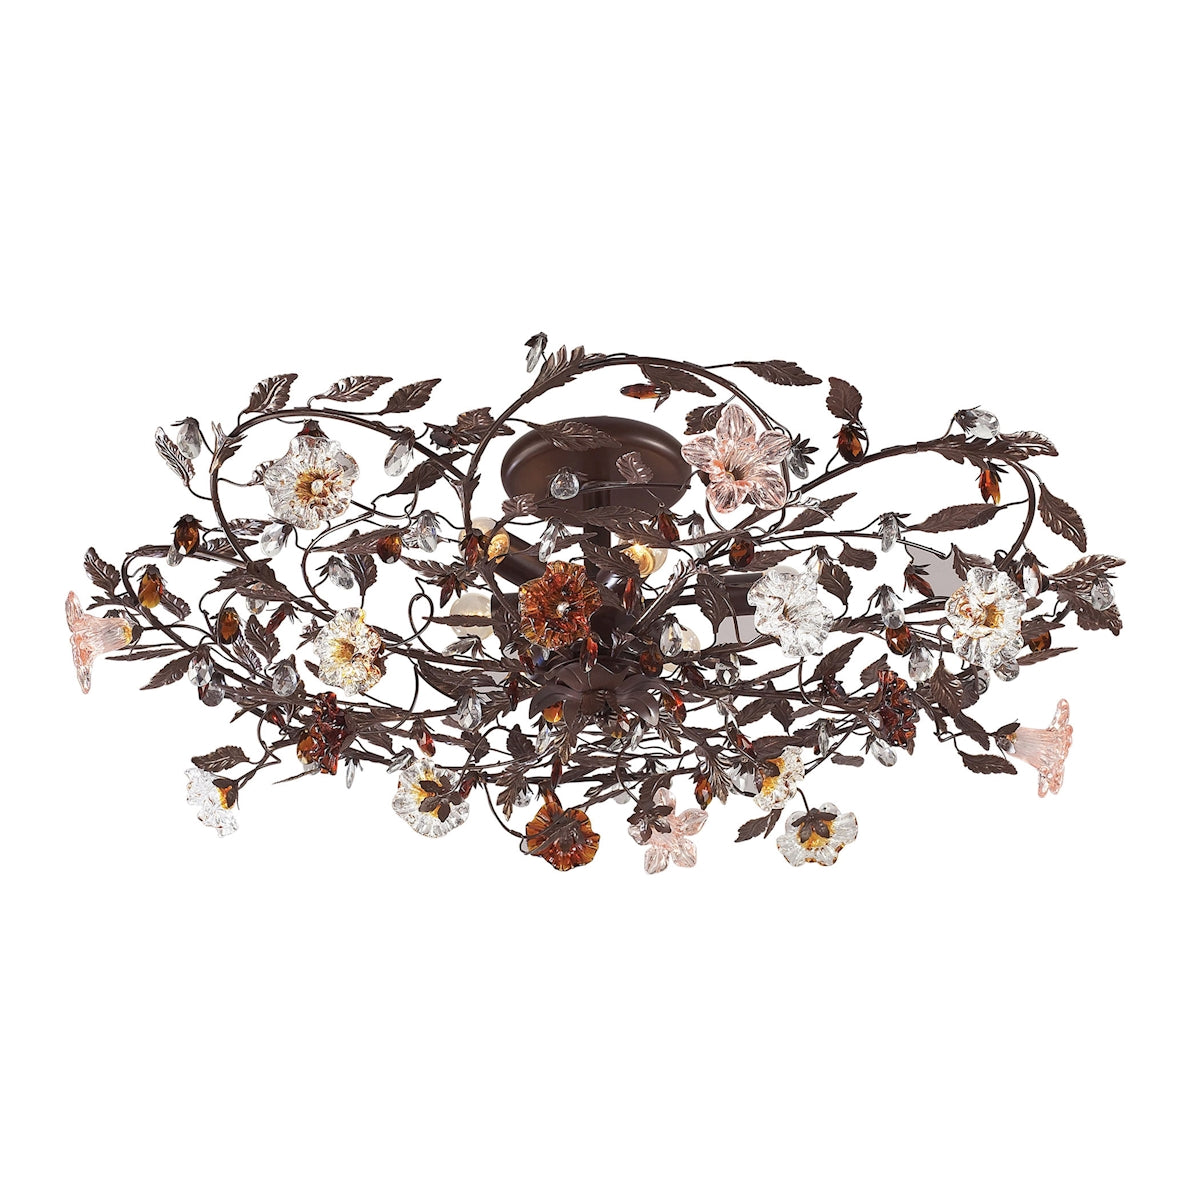 Cristallo Fiore 6-Light Flush Mount in Deep Rust with Clear and Amber Florets